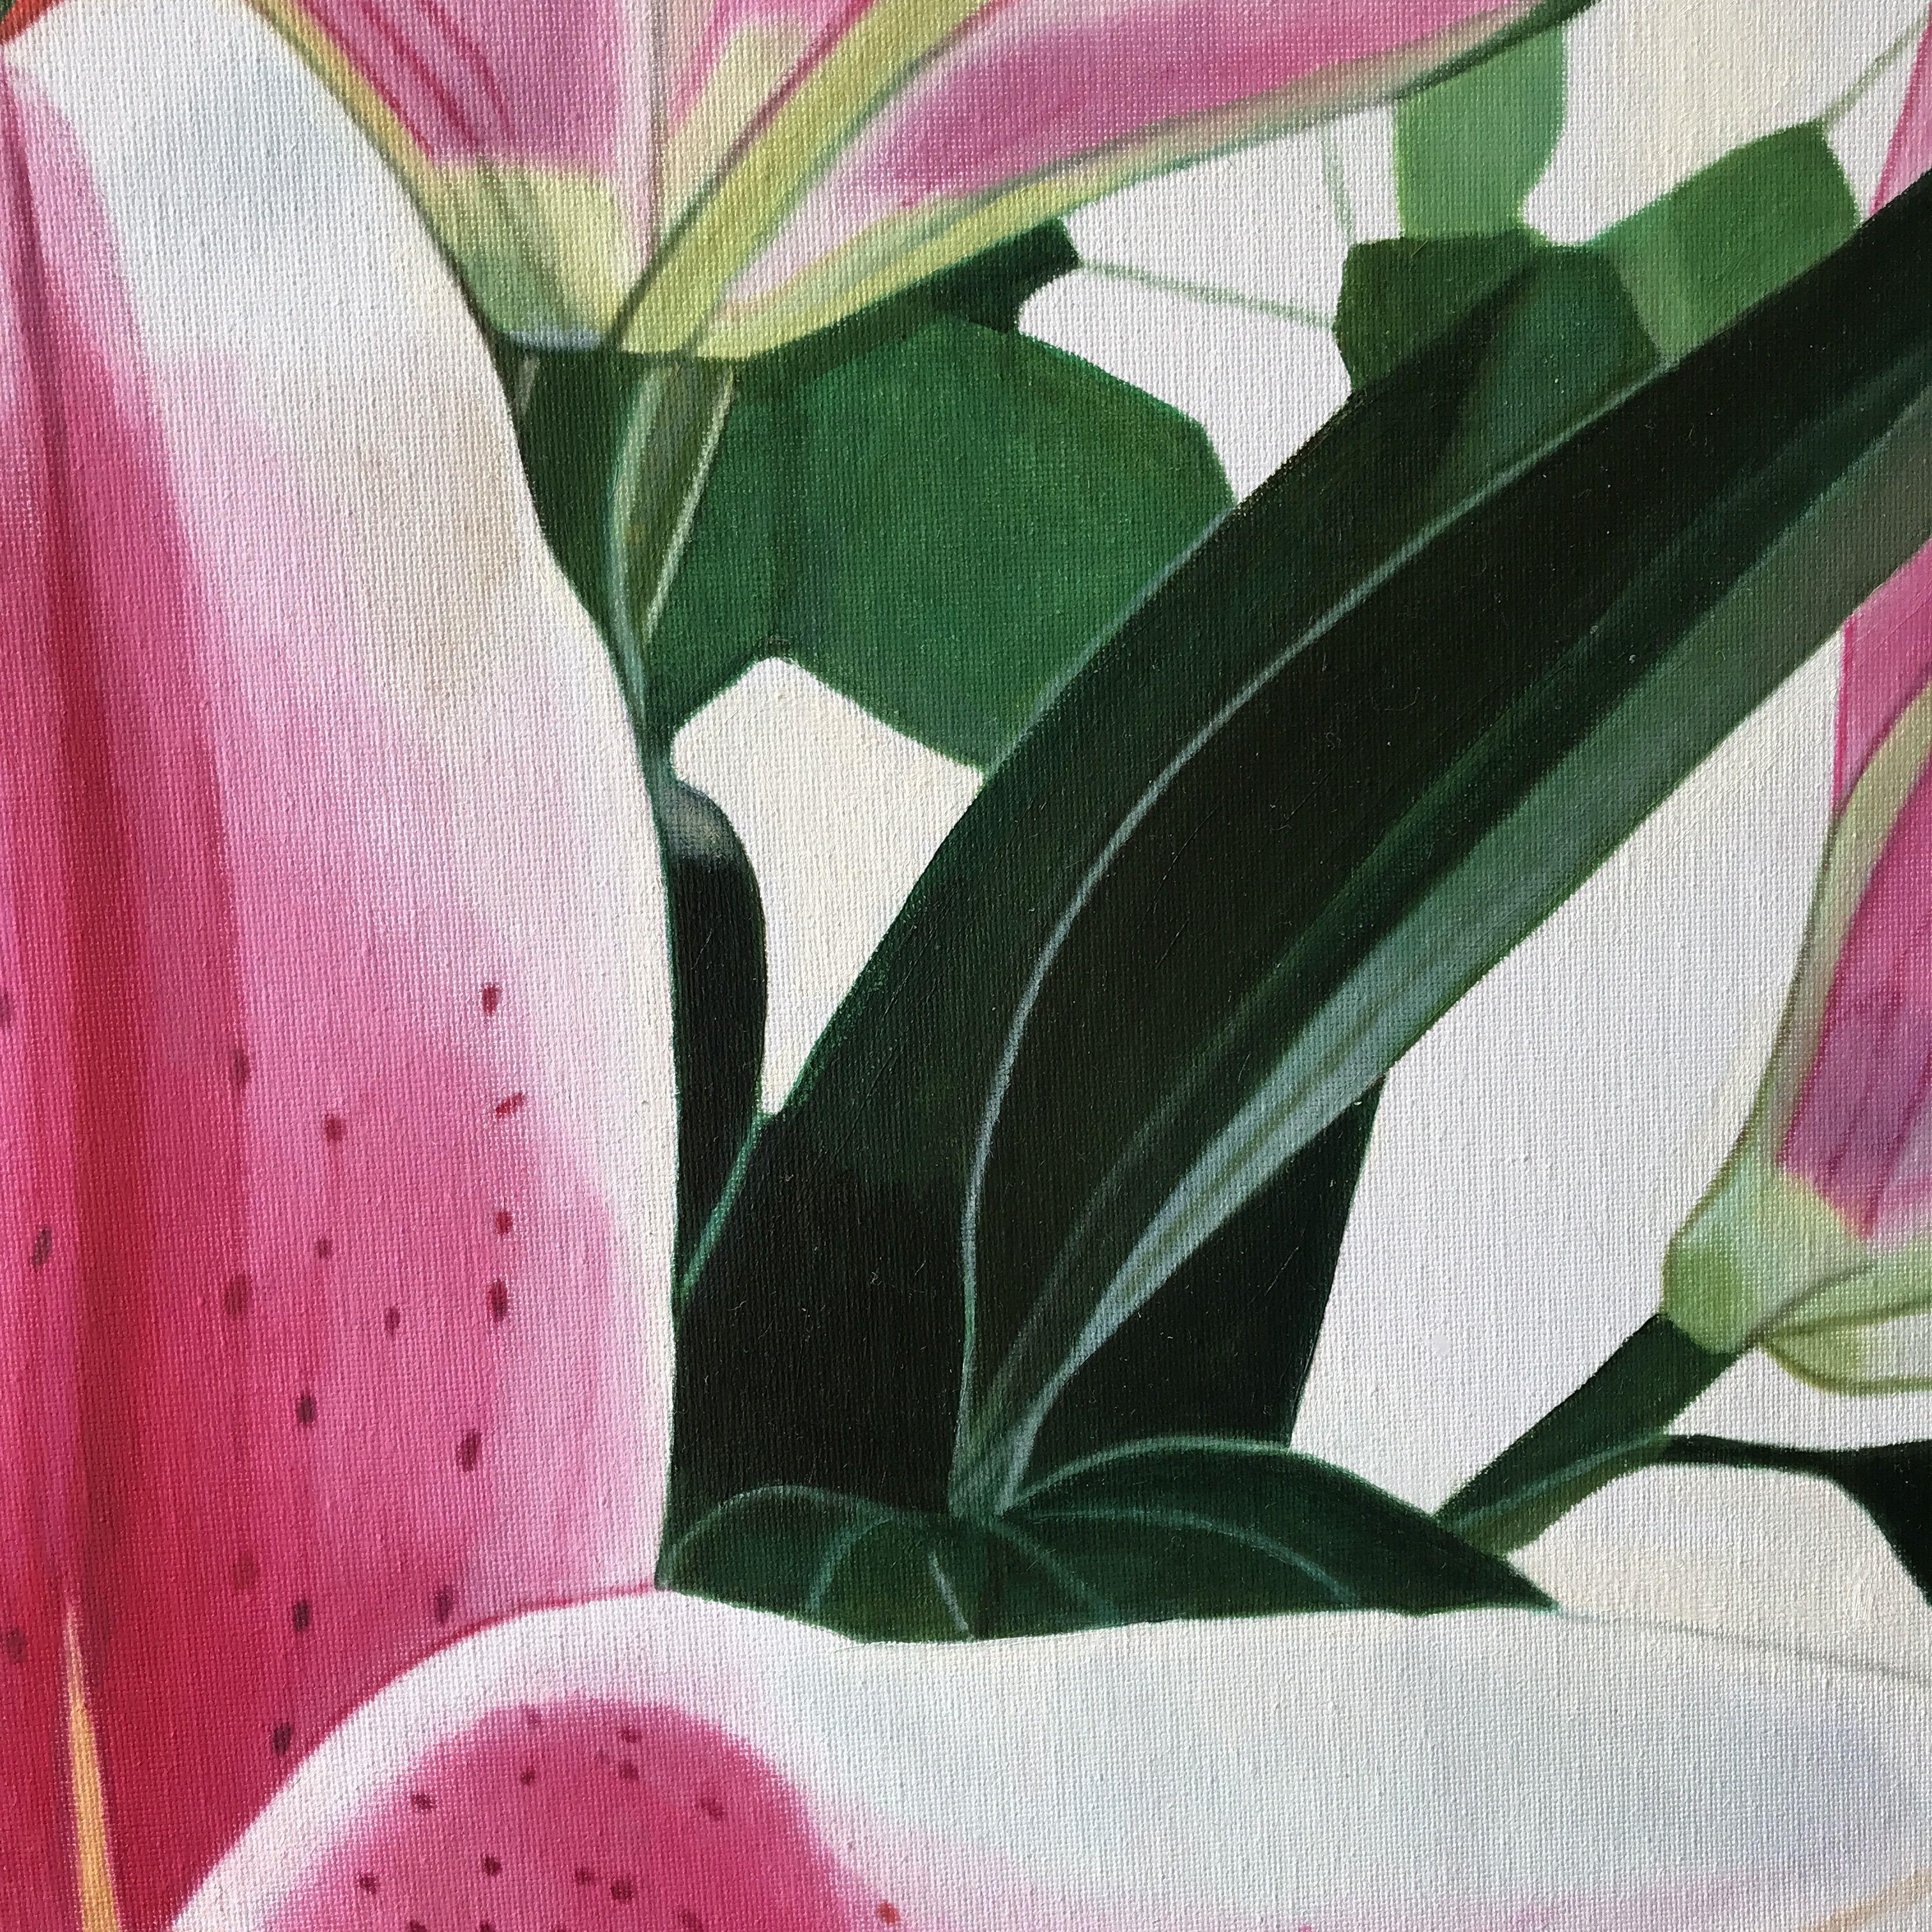 Lys roses (Pink lilies), Painting, Oil on Canvas For Sale 2